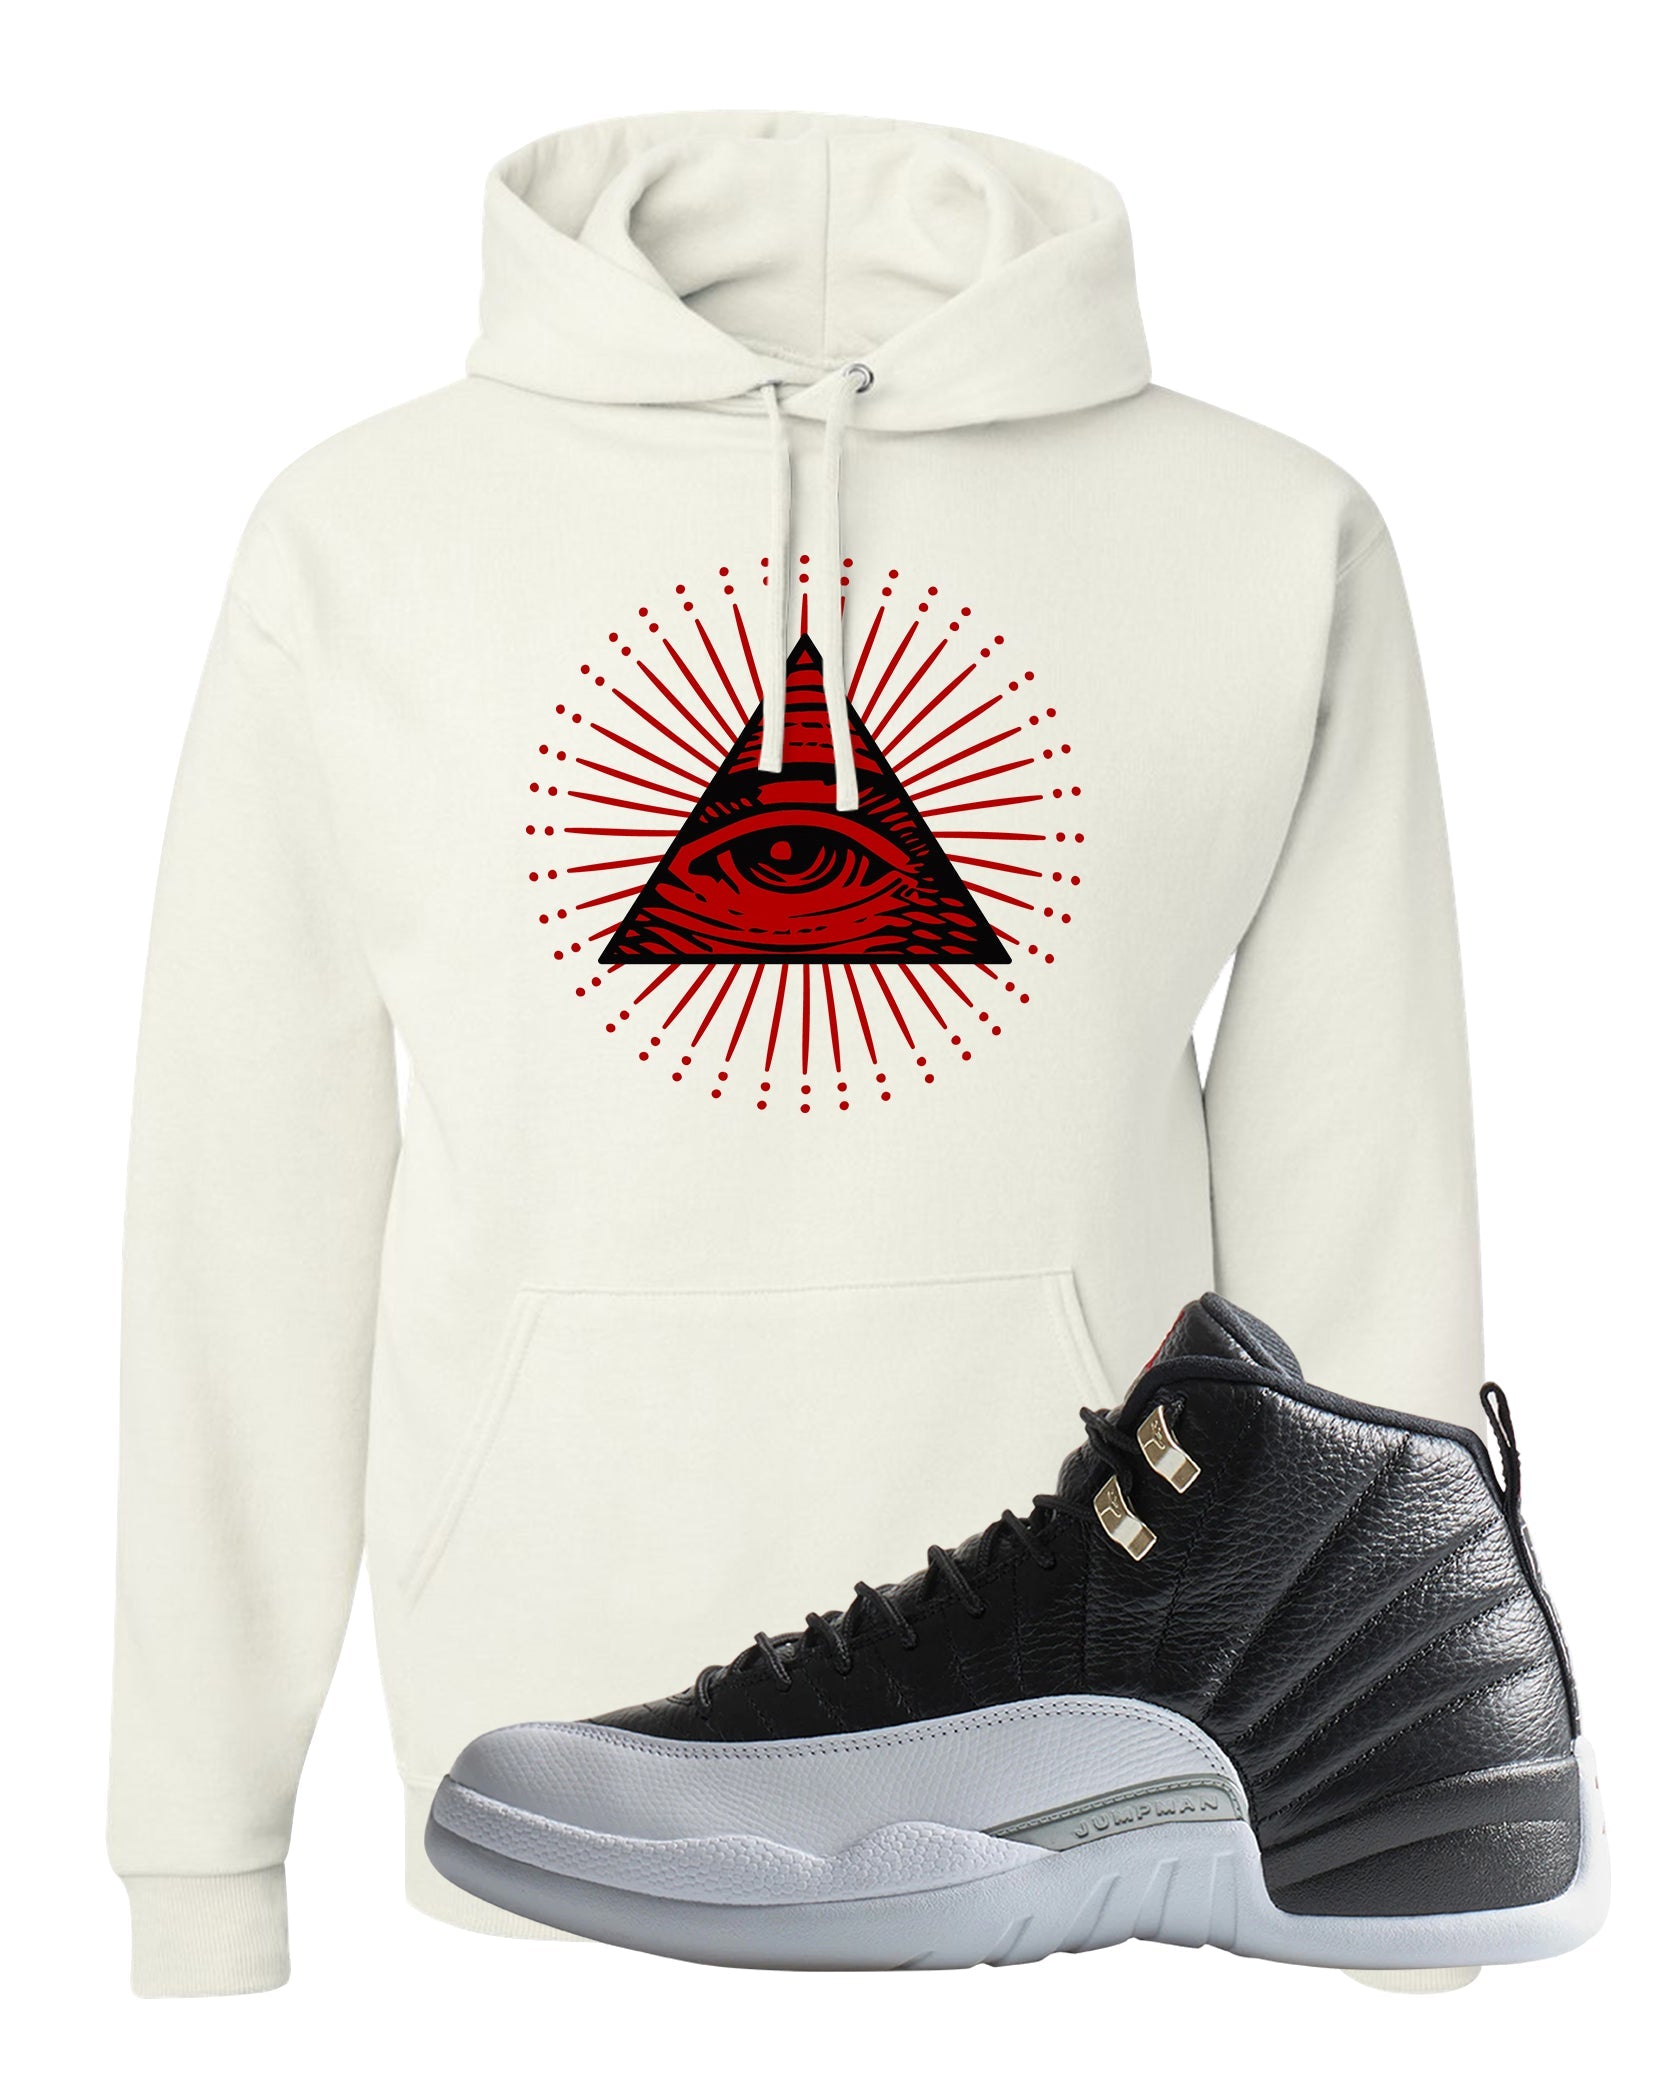 Playoff 12s Hoodie | All Seeing Eye, White